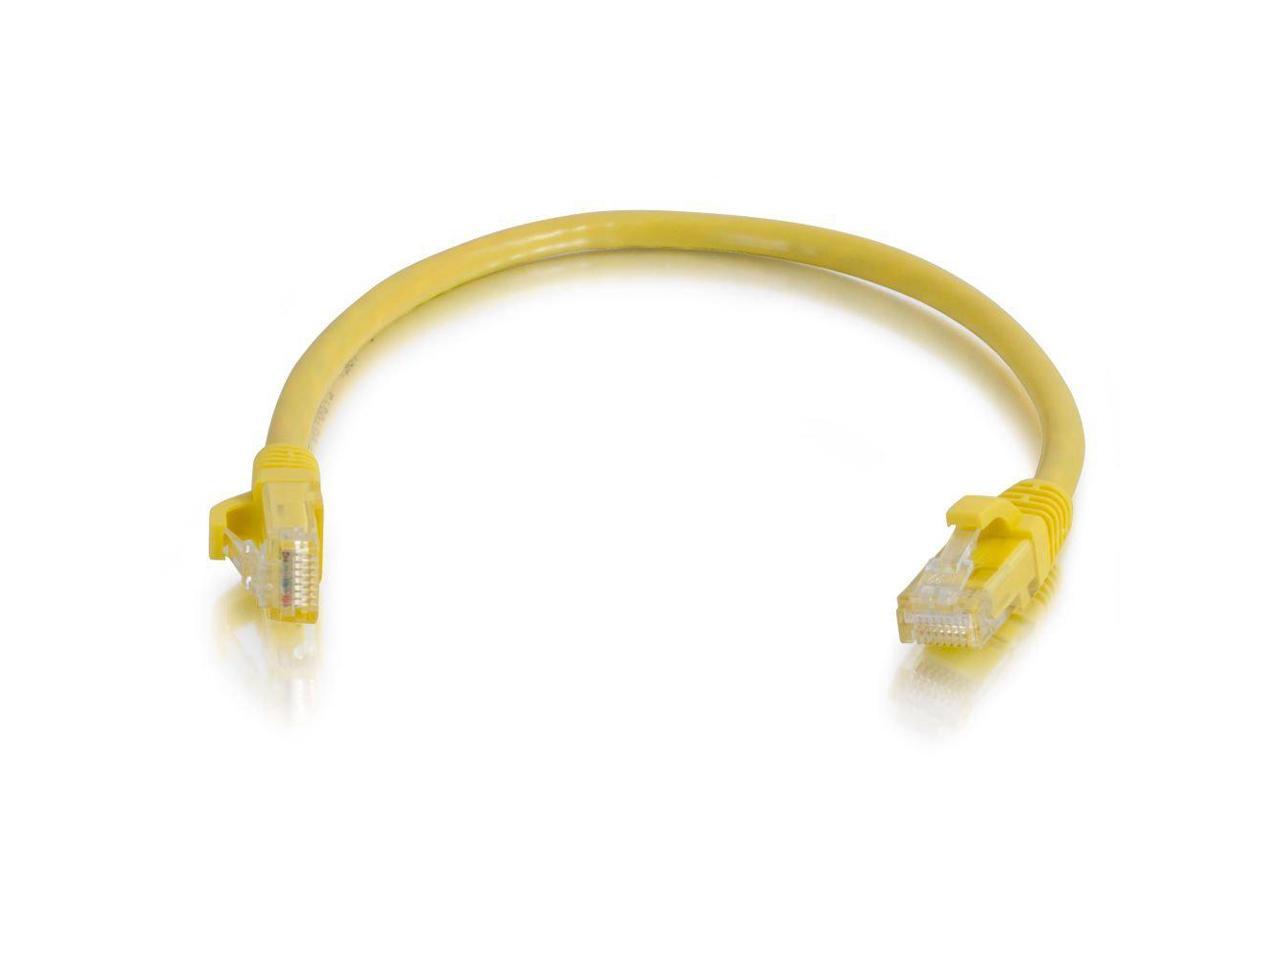 C2G Cables to Go 338424 5-ft Male RJ45 Cat5e Ethernet Cable Cord NEW Yellow 